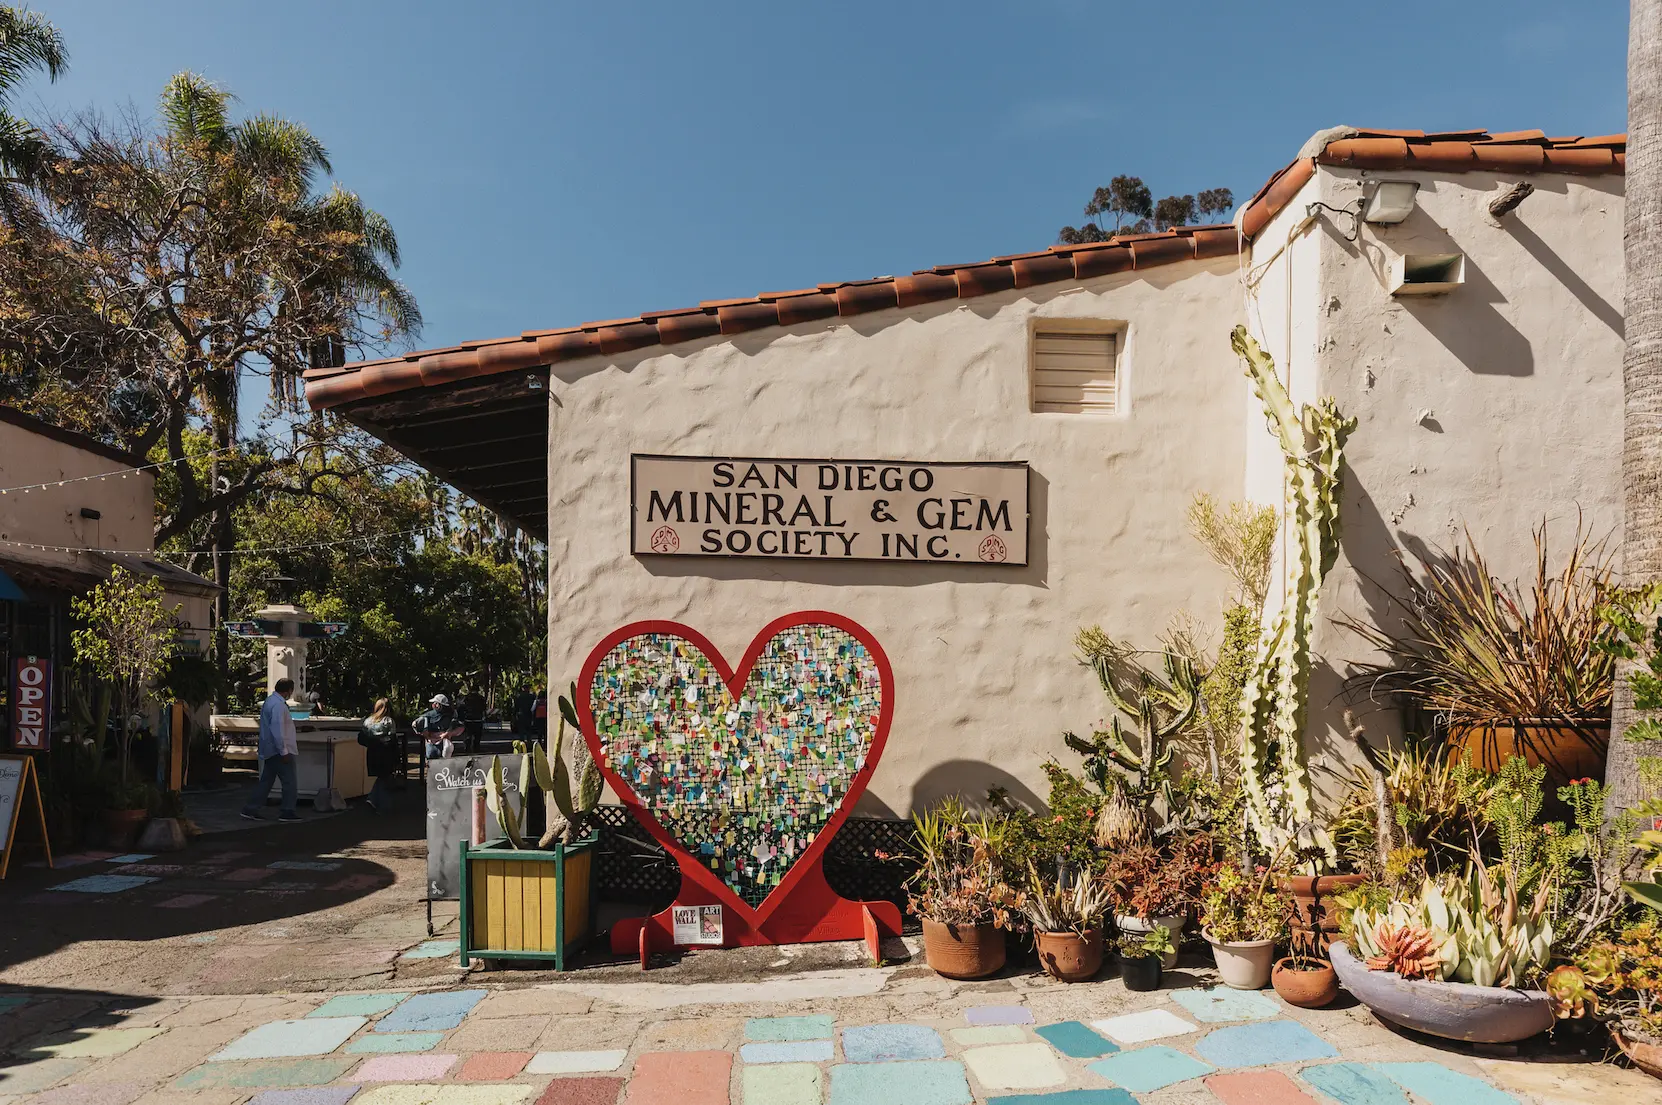 The San Diego Mineral & Gem Society Museum